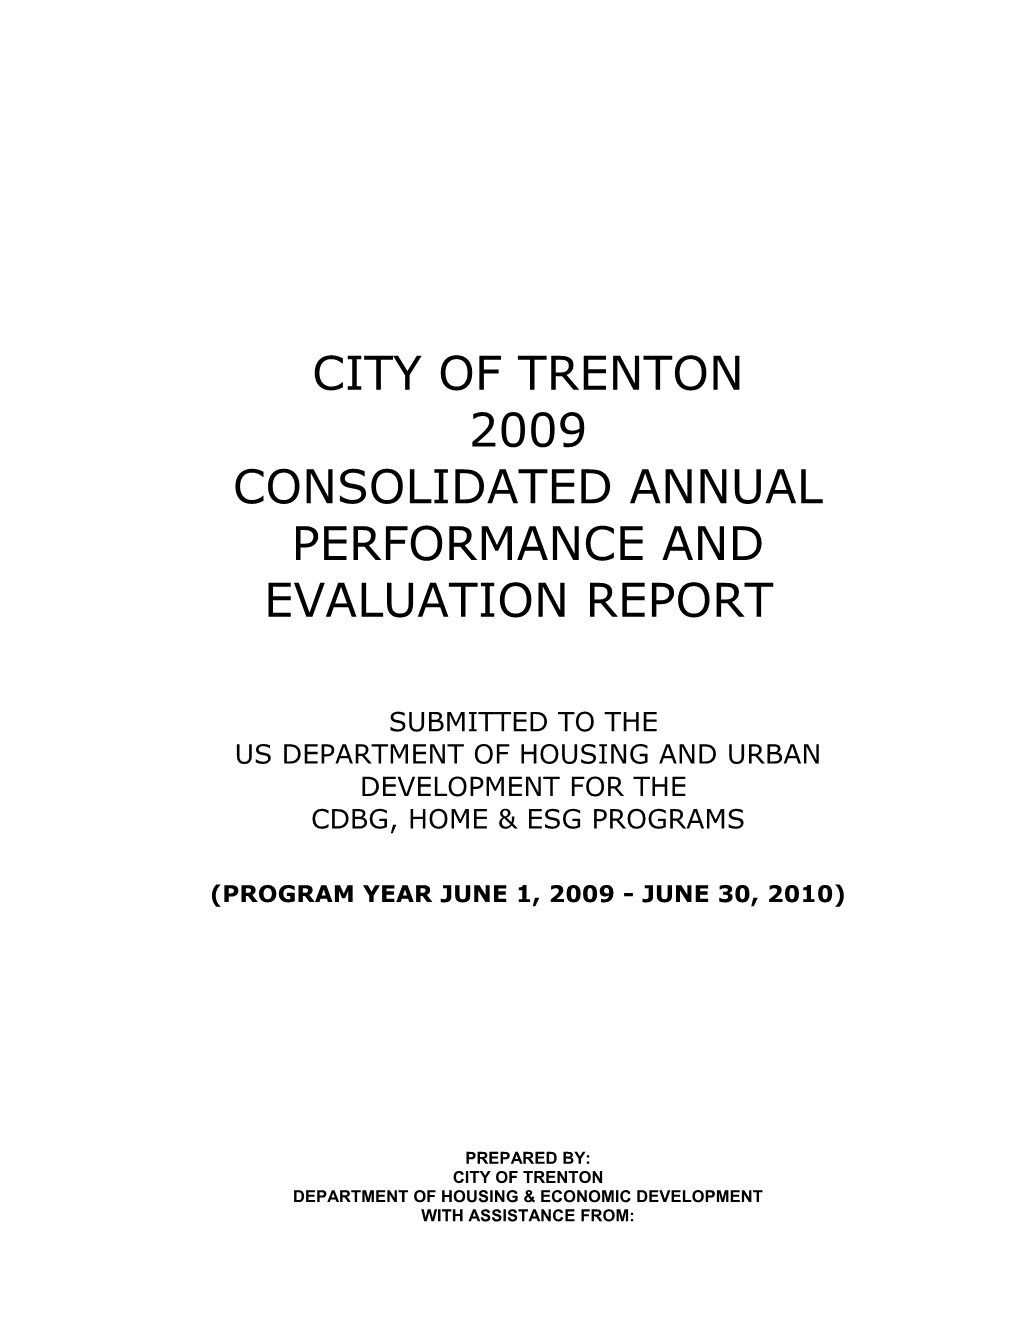 City of Trenton2009consolidated Annual Performance and Evaluation Report